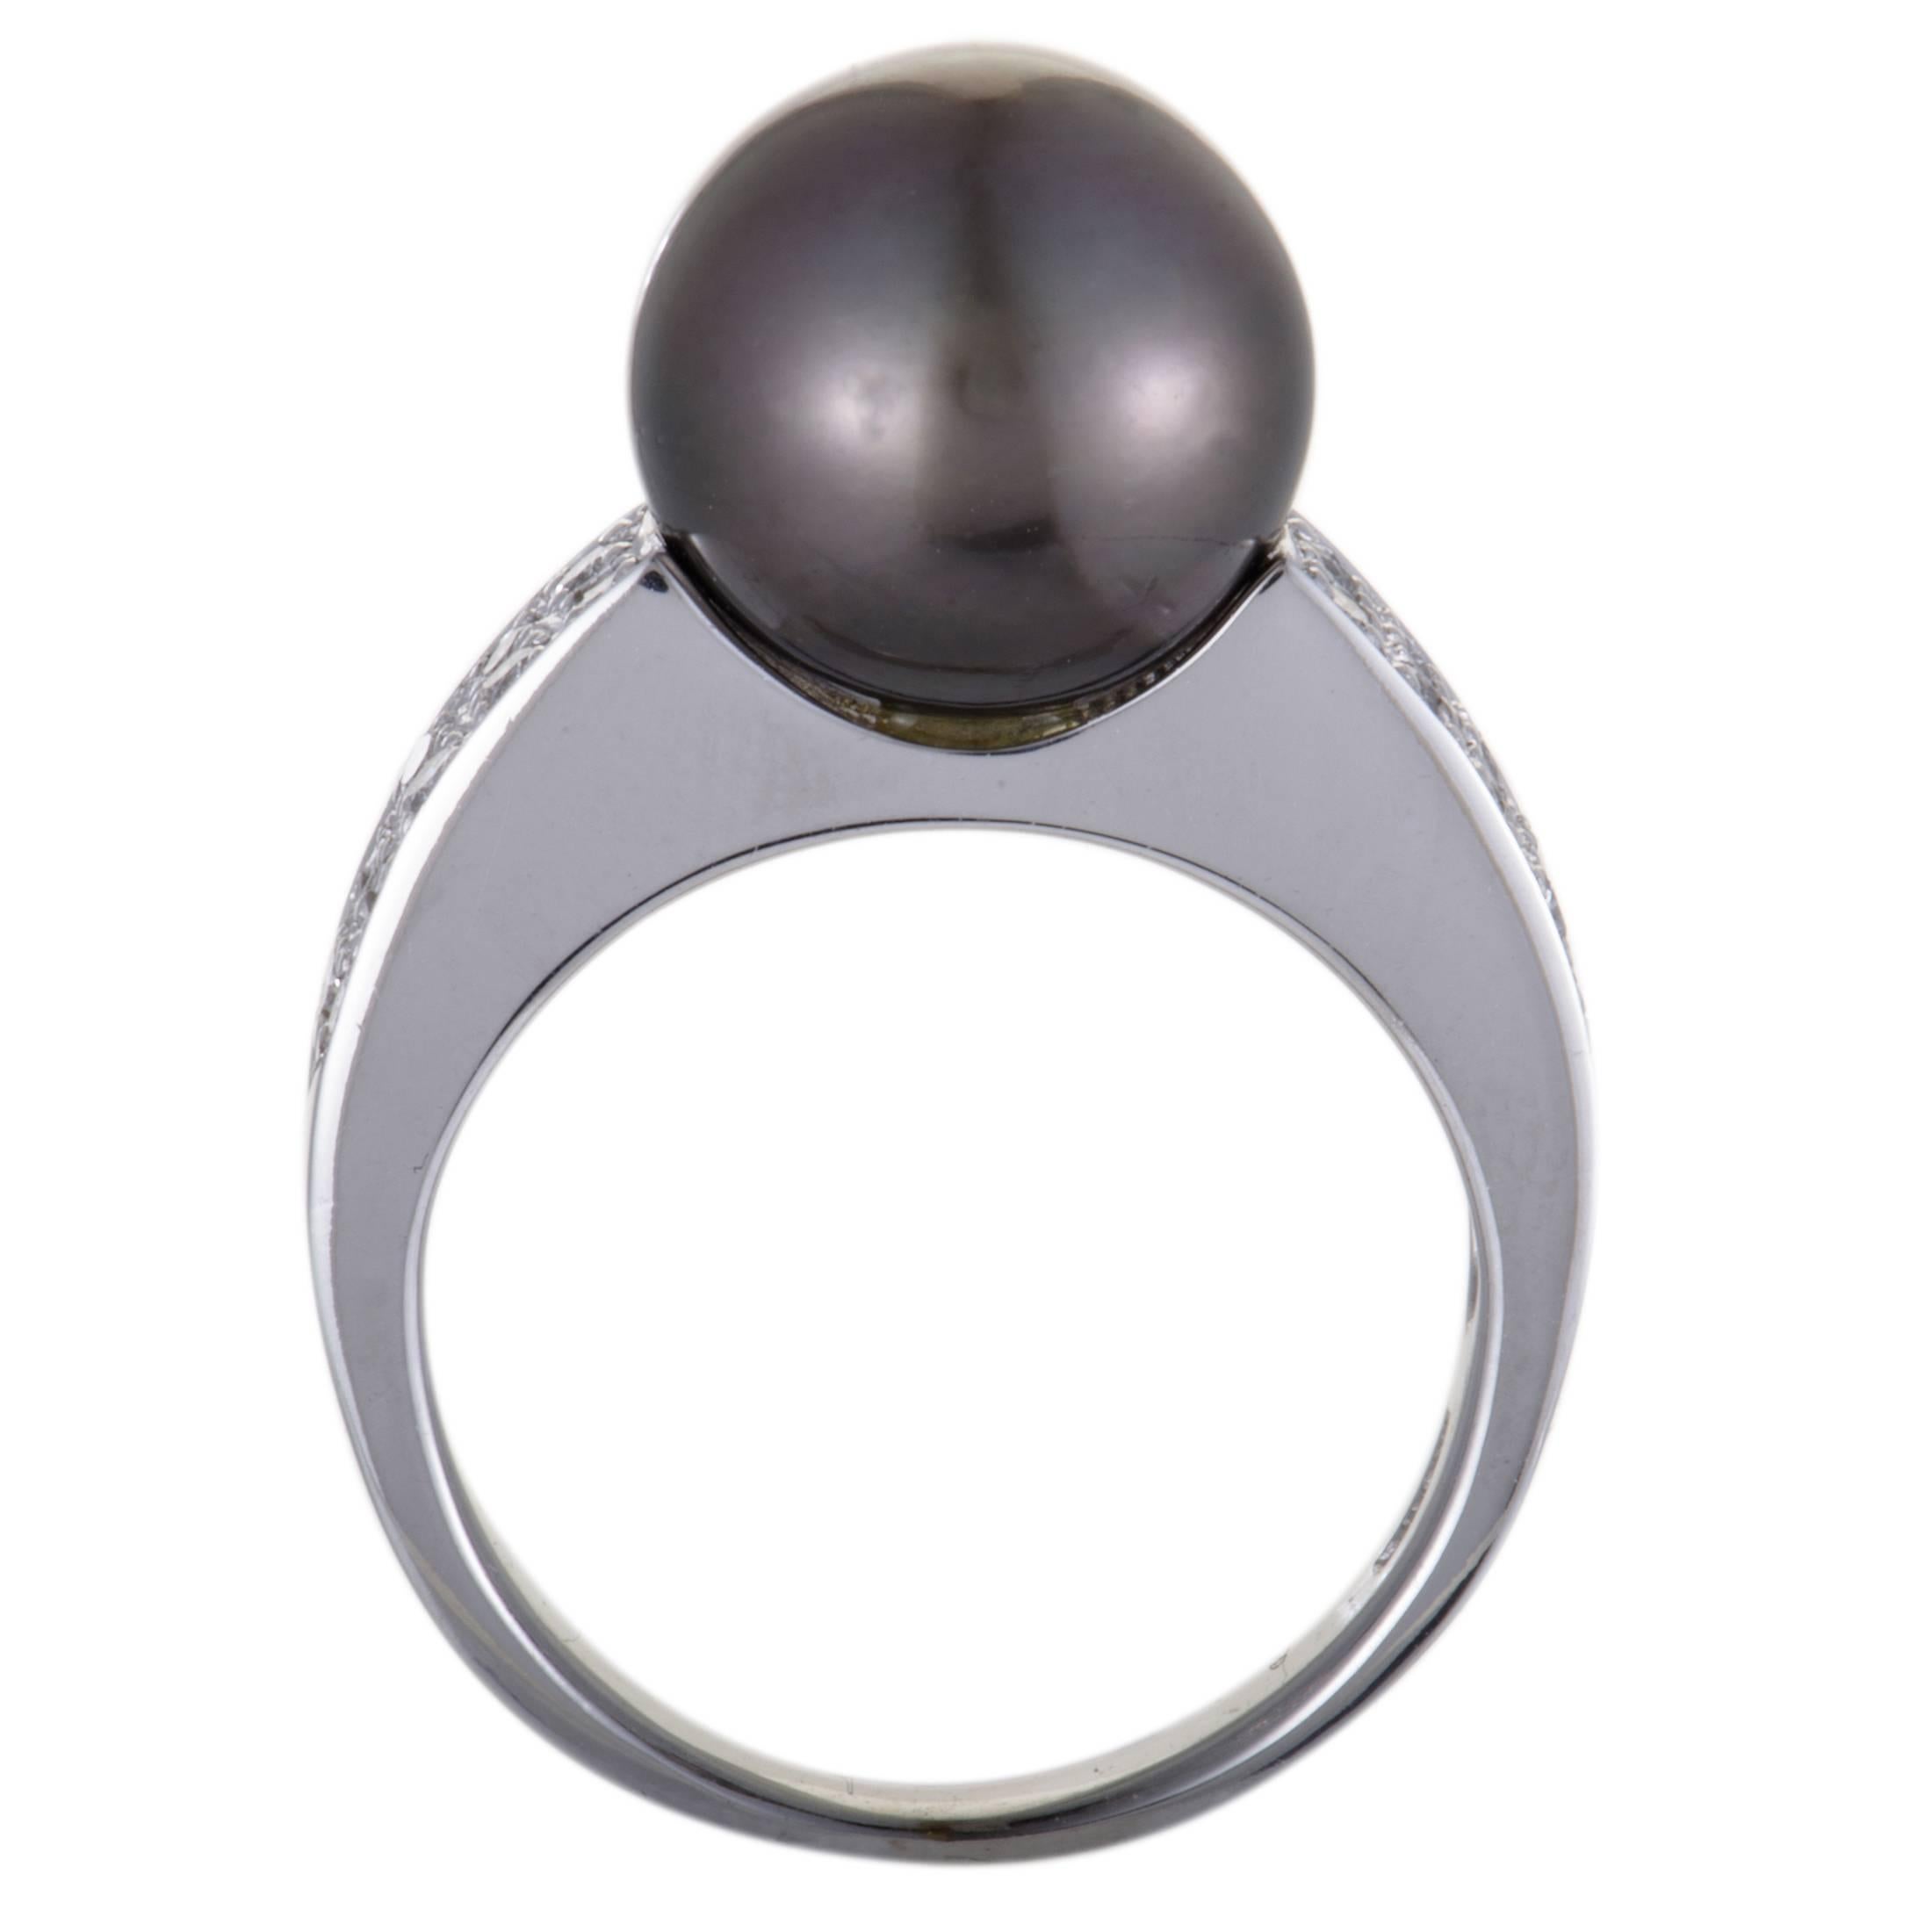 The bright gleam of 18K white gold and the captivating allure of the black pearl produce a compelling aesthetic effect in this stunning ring that features elegant design and stylish décor. The ring is also set with resplendent diamond stones that